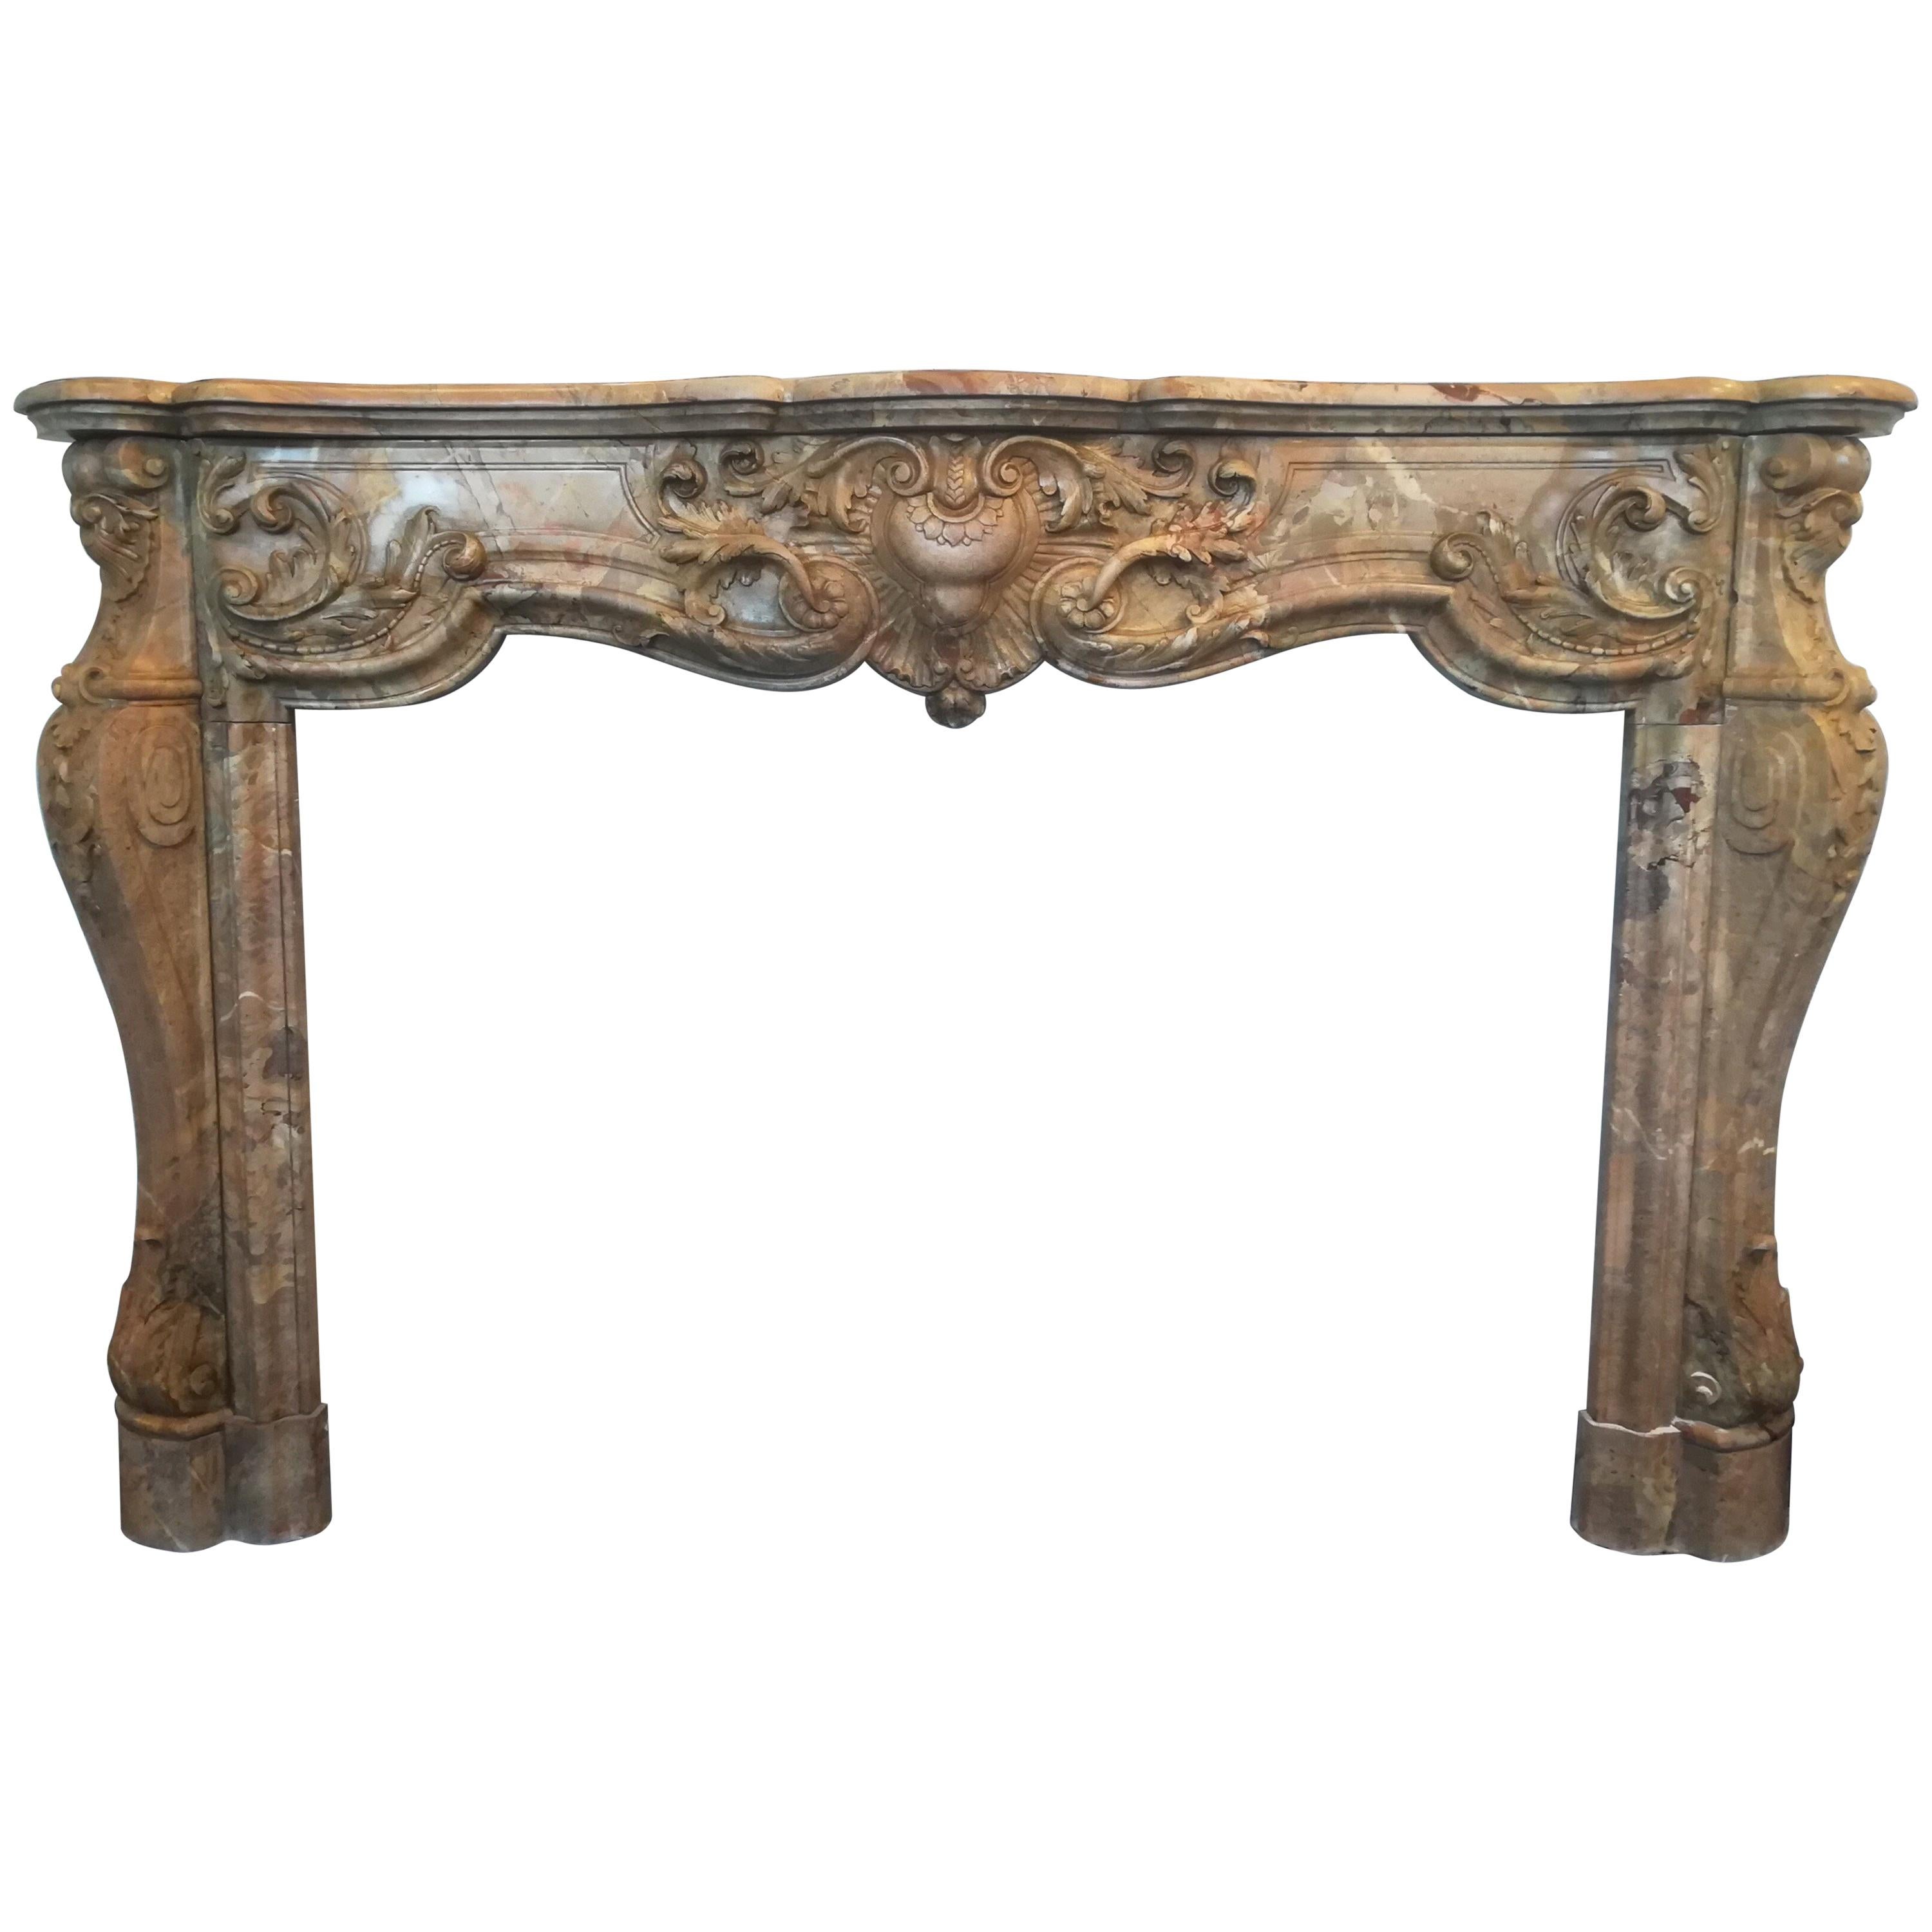 19th Century, Louis XIV Style, Rare Fireplace in Sarrancolin Fantastico Marble For Sale